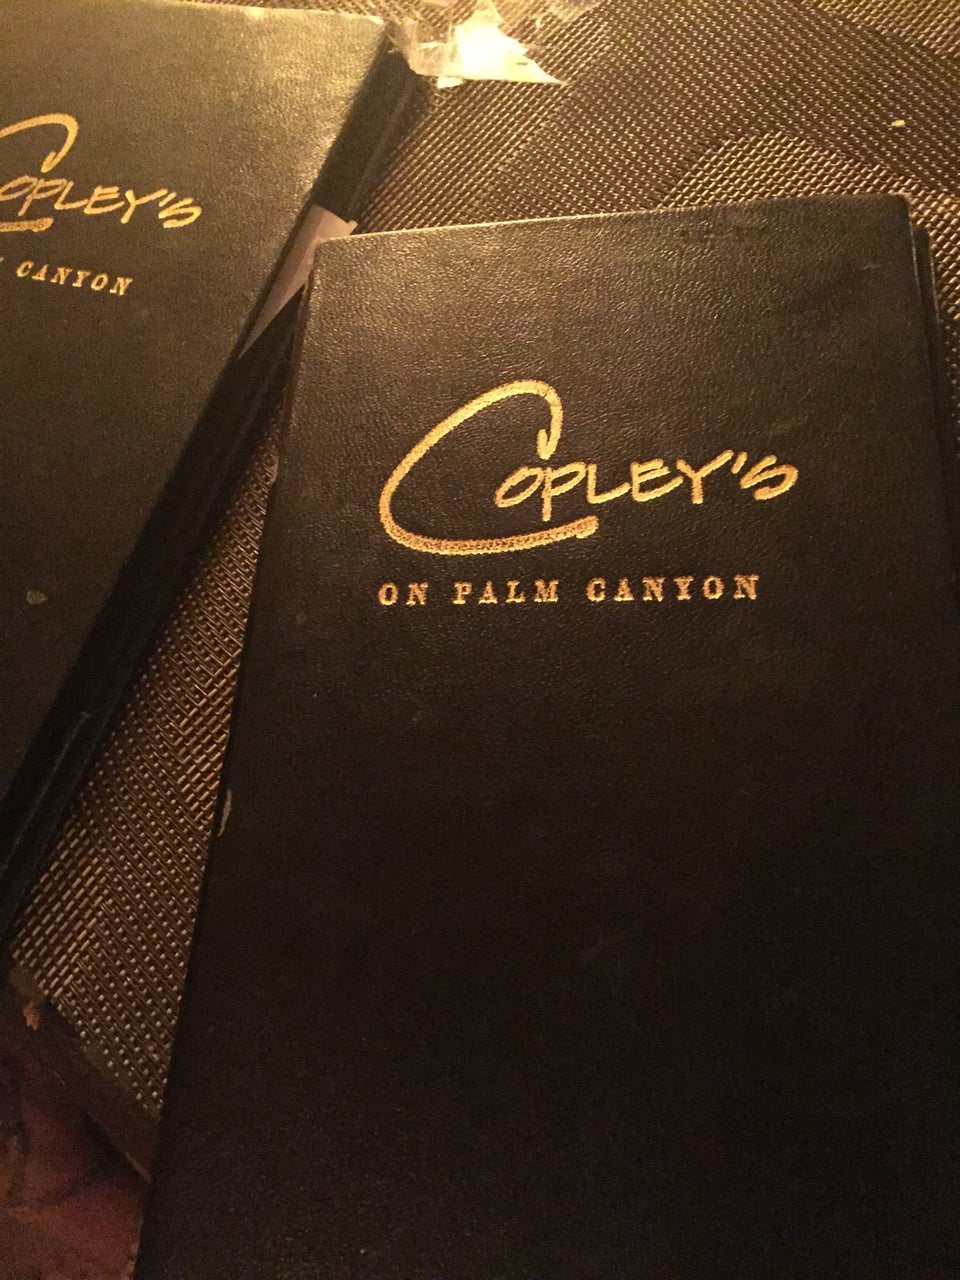 Photo of Copley's on Palm Canyon